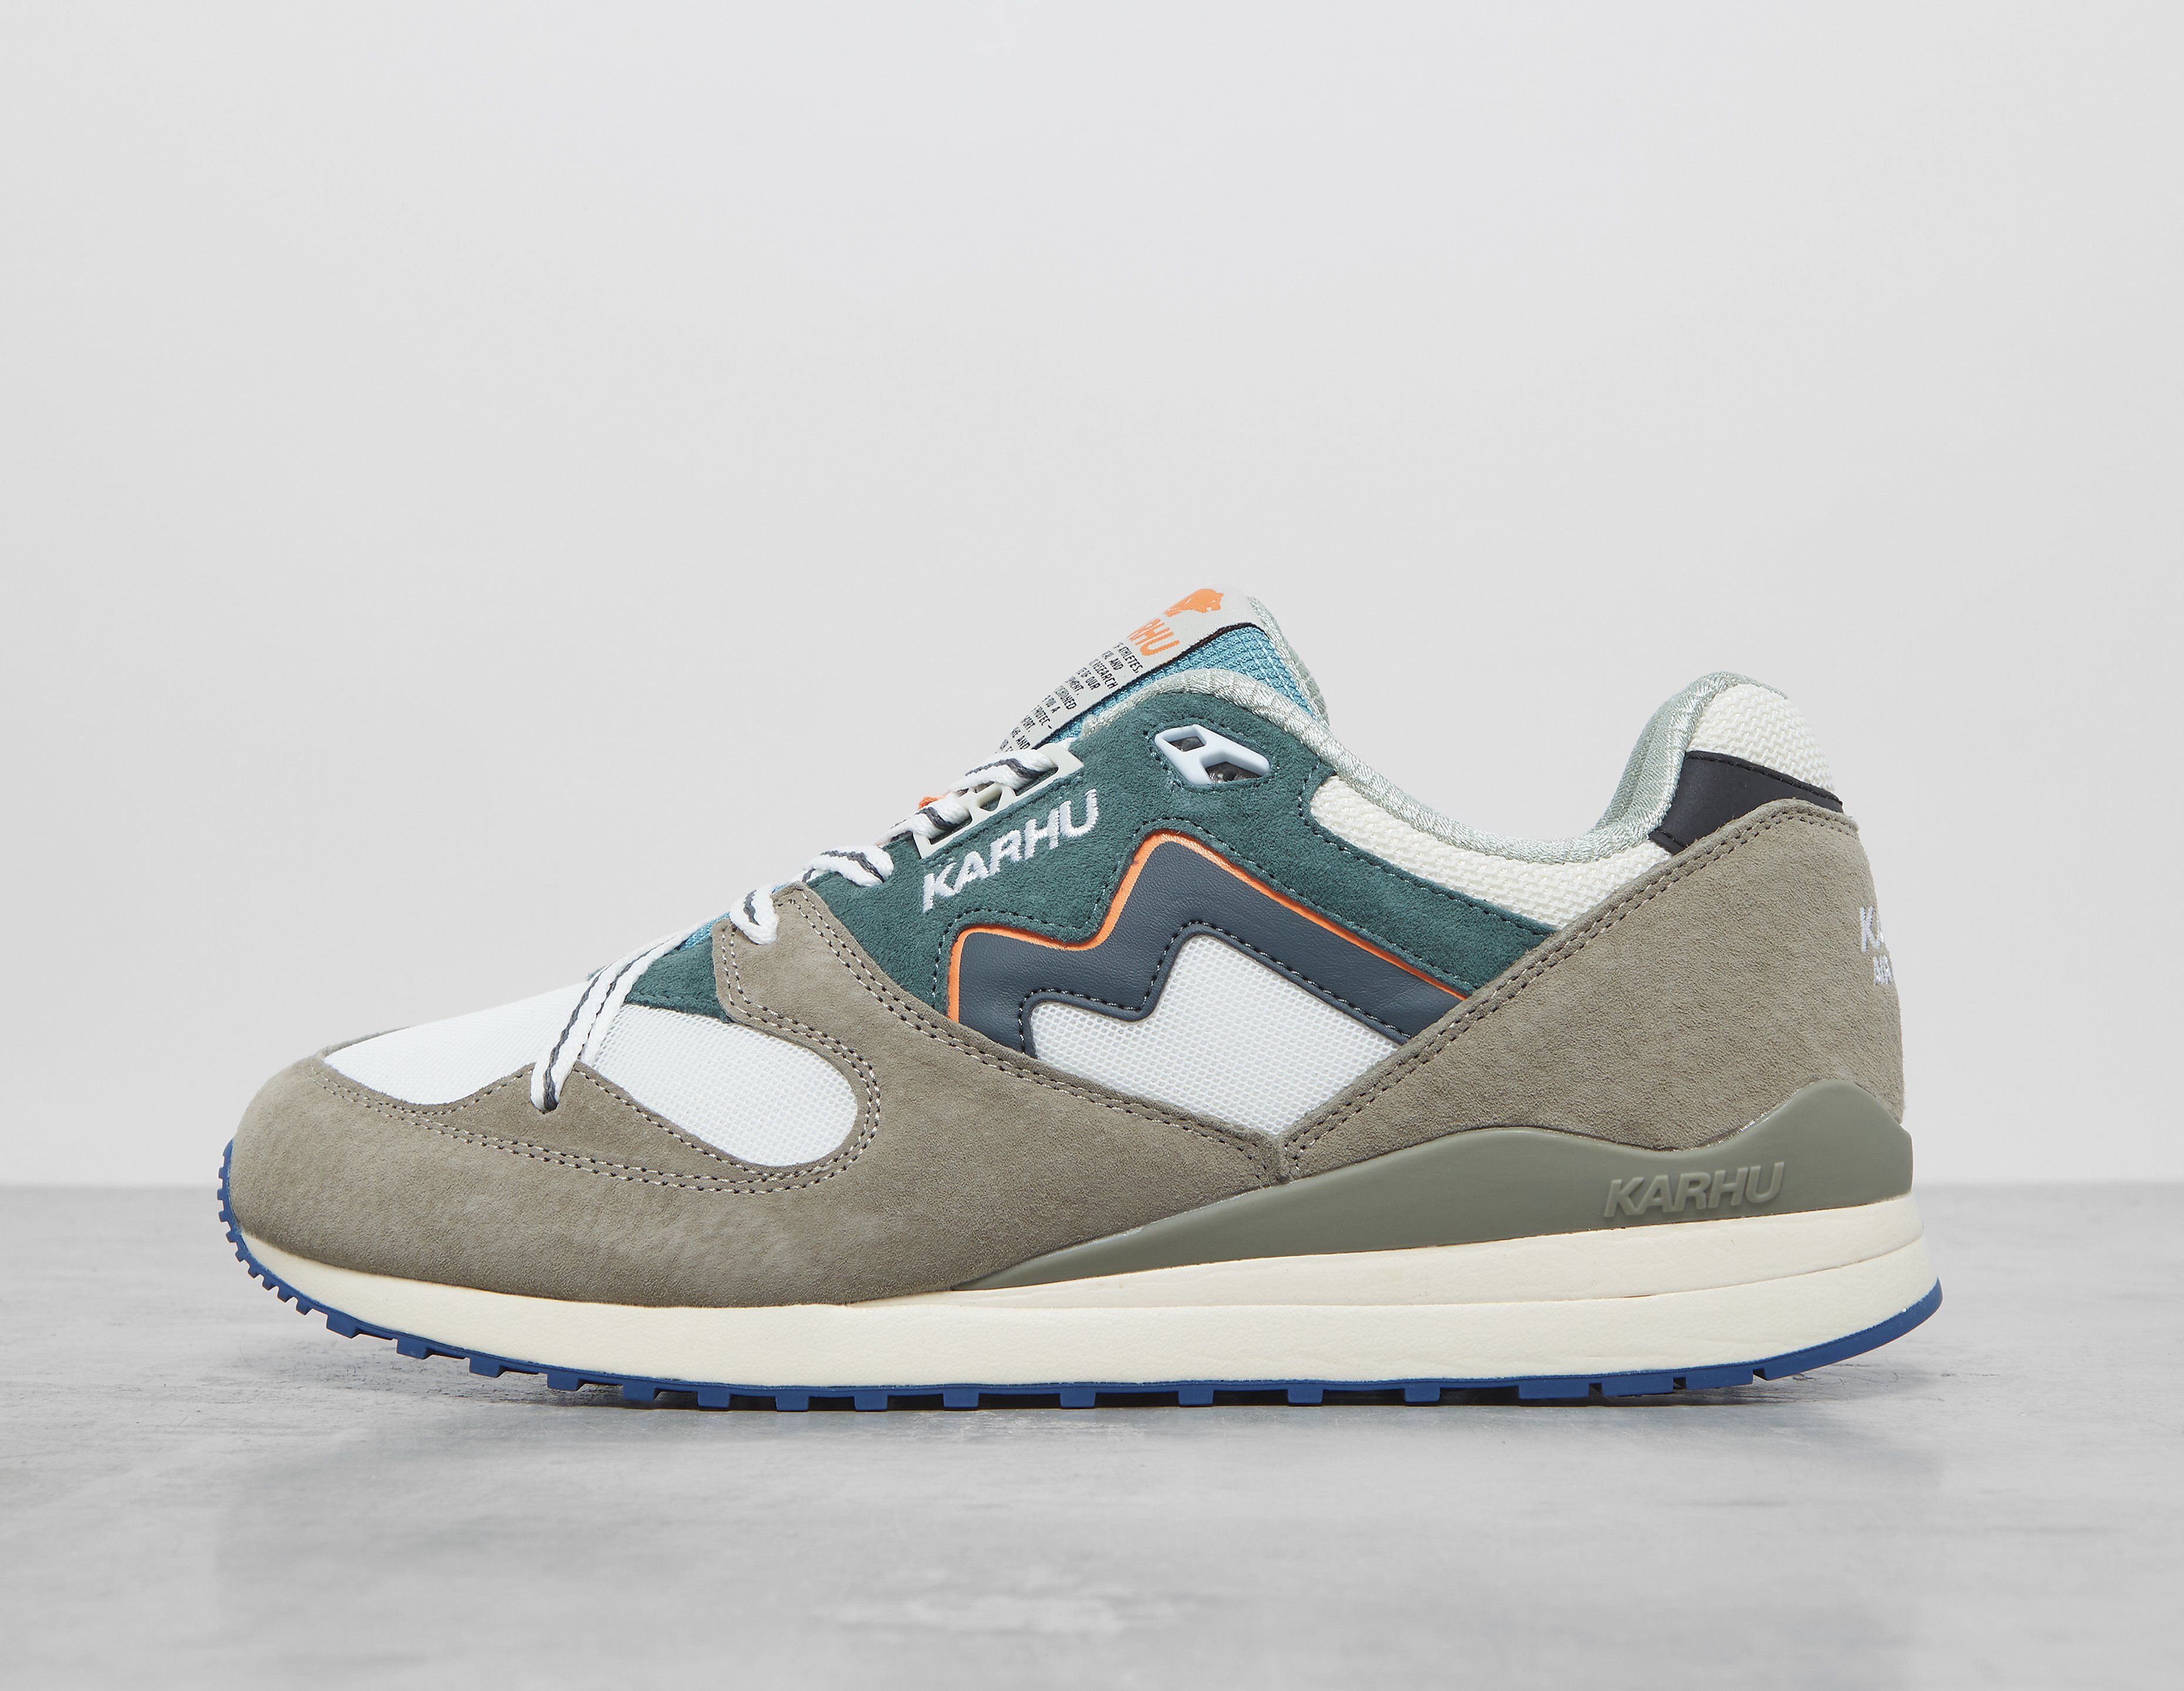 Karhu Synchron Classic, Cleaning Product